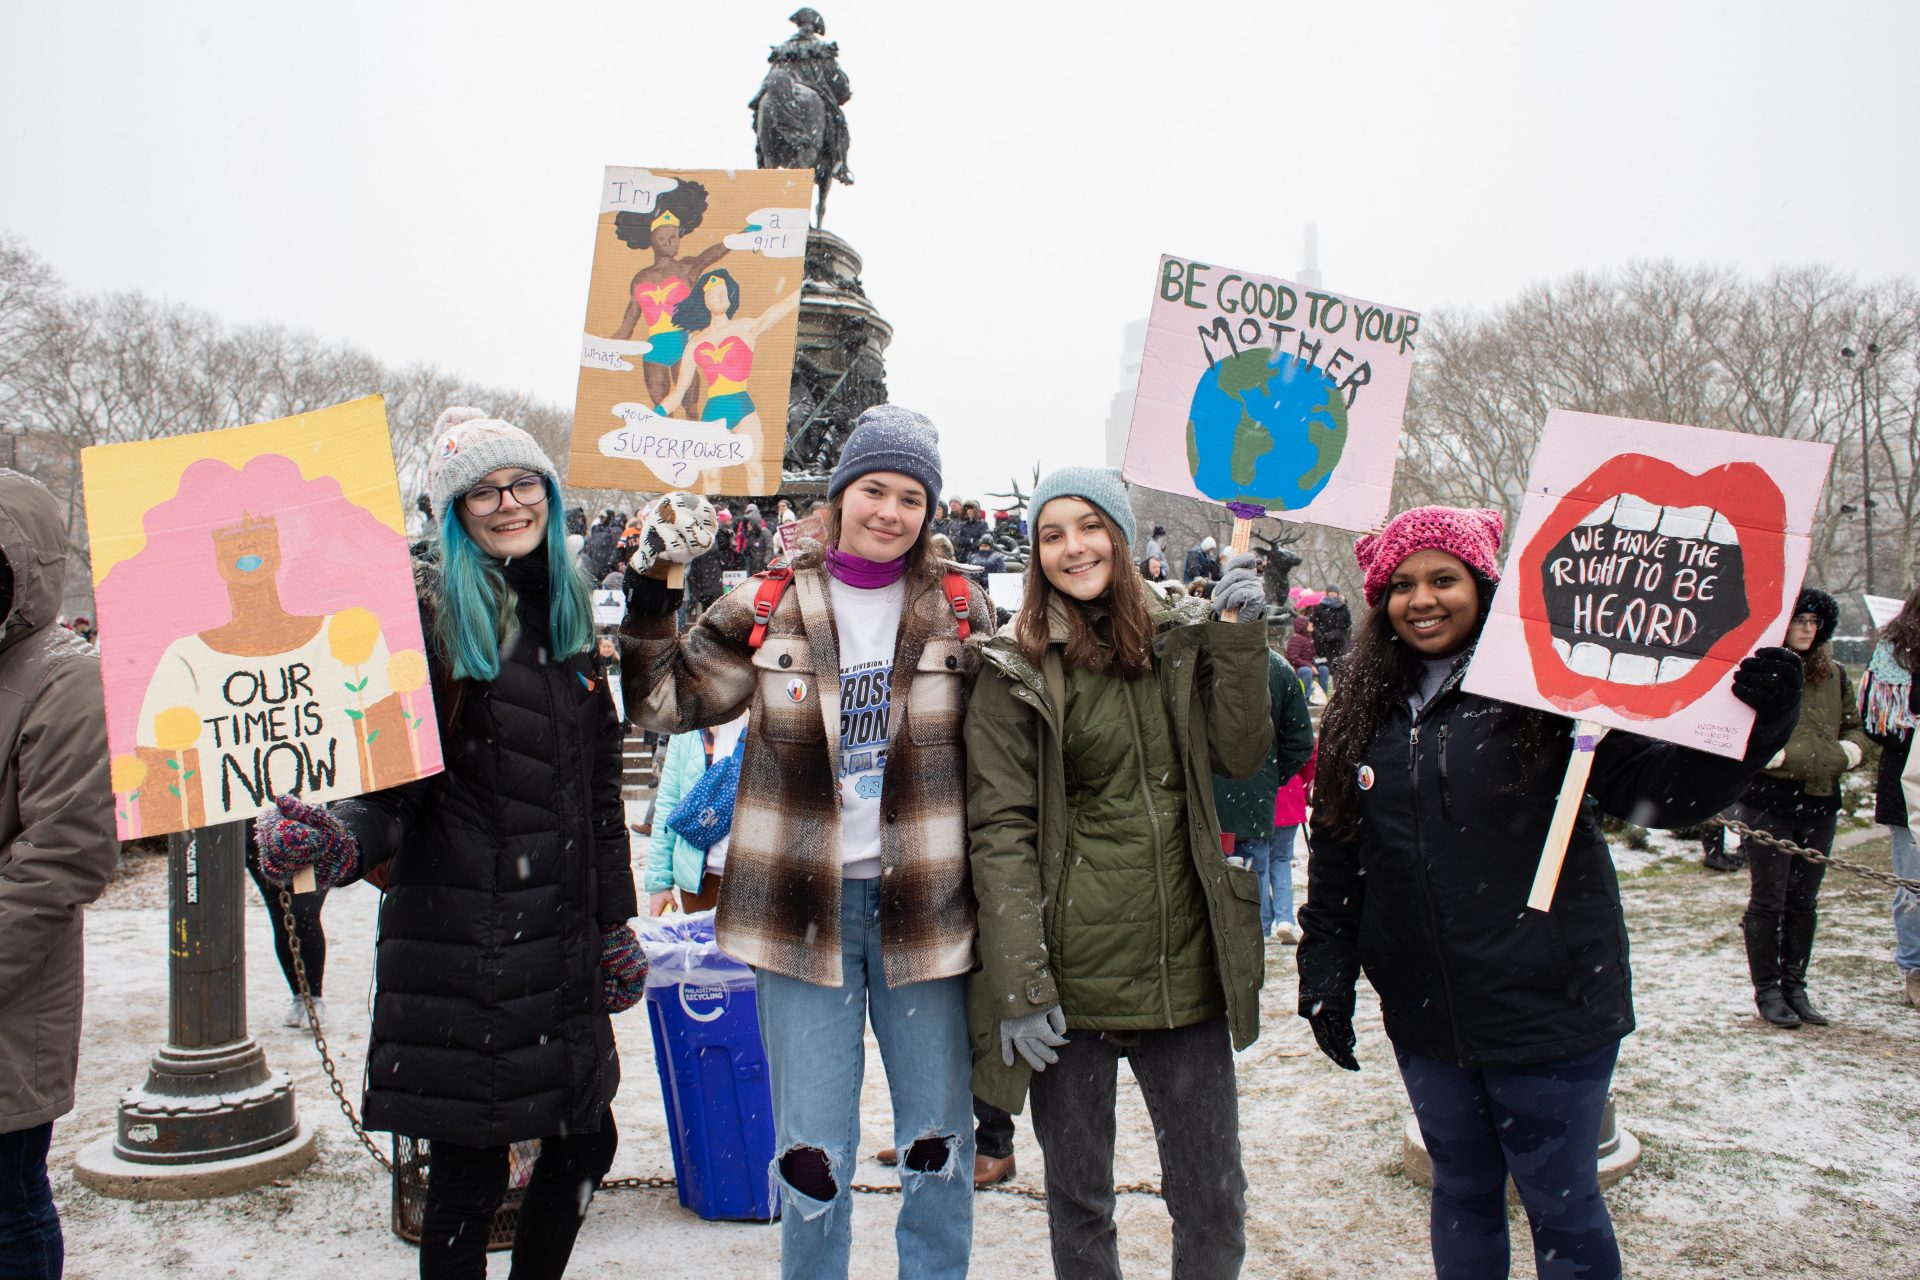 Downingtown East High School students Chloe Baumann, Hope Hessler, Megan Beale, and Gabbi Chacko traveled to Philadelphia to attend the Women's March.